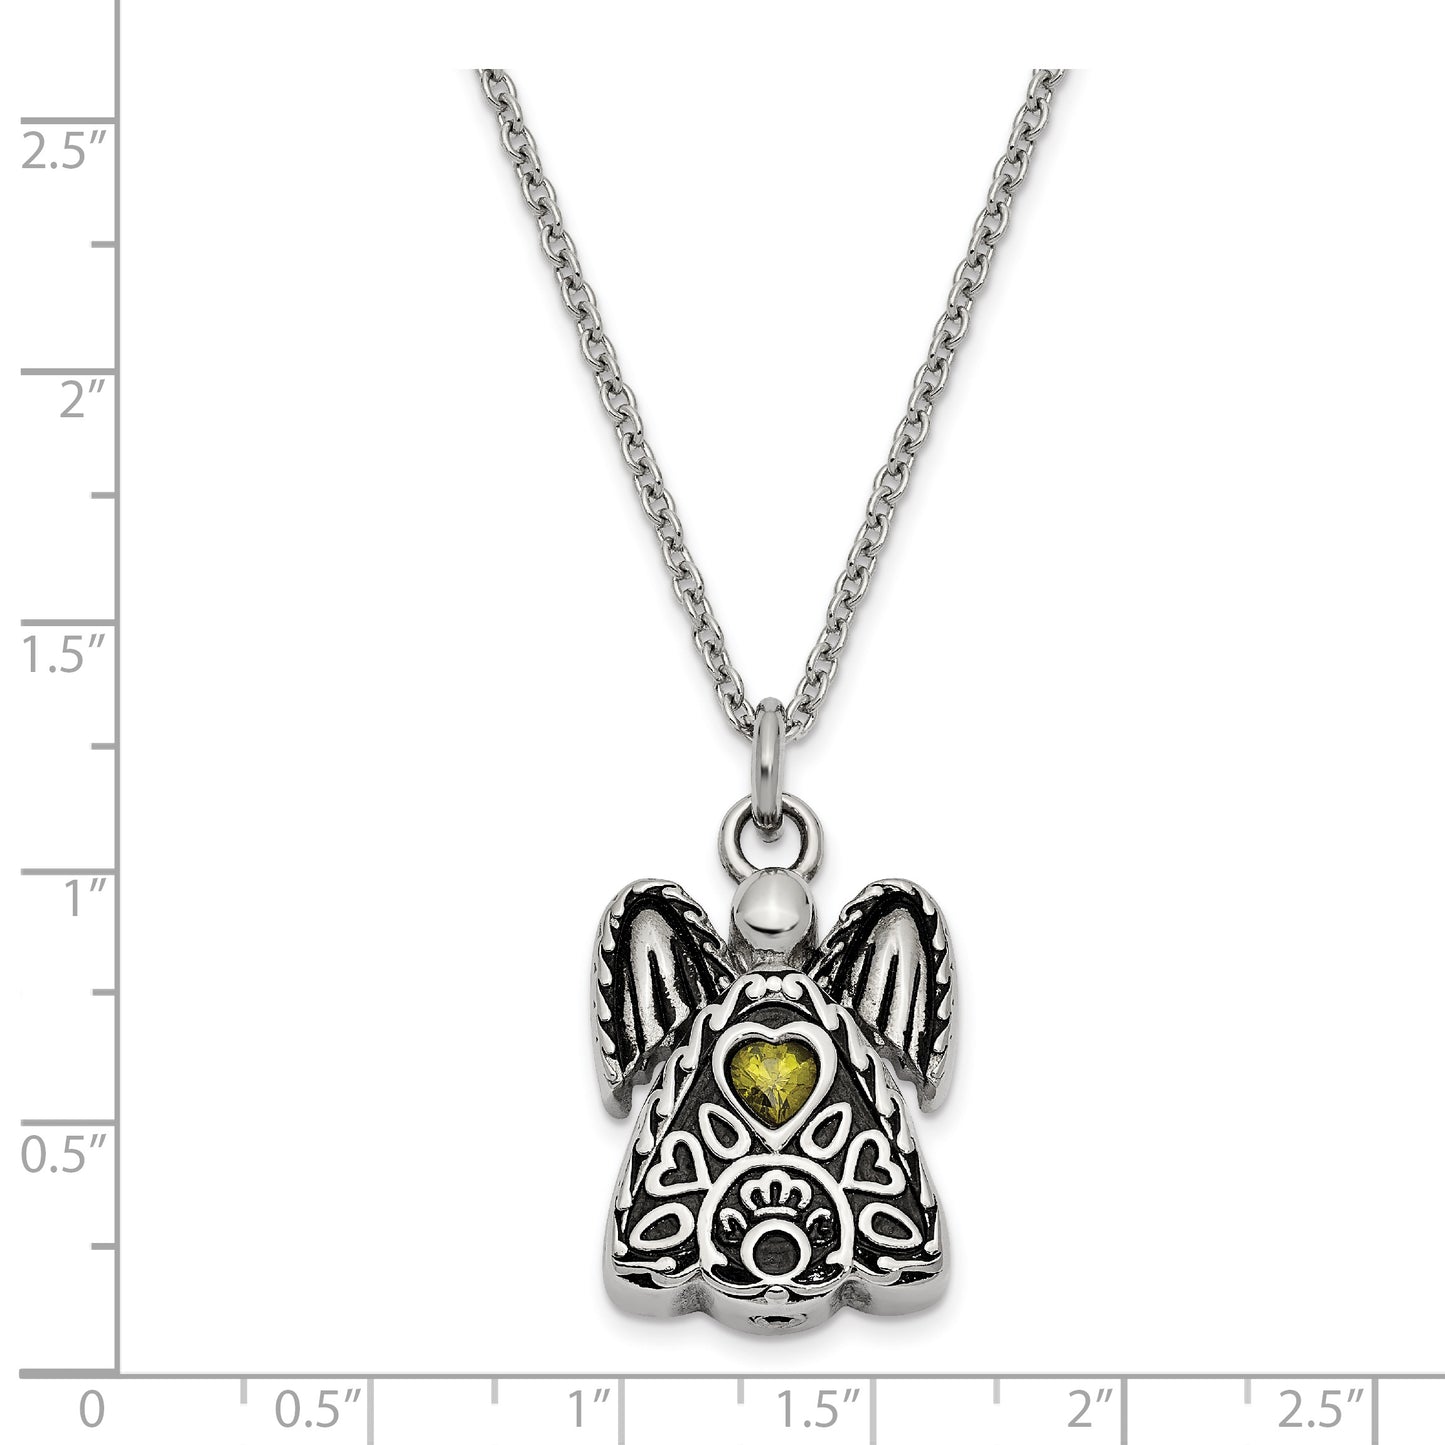 Sentimental Expressions Stainless Steel Light Green CZ August Birthstone Antiqued Angel Ash Holder 18 inch Necklace